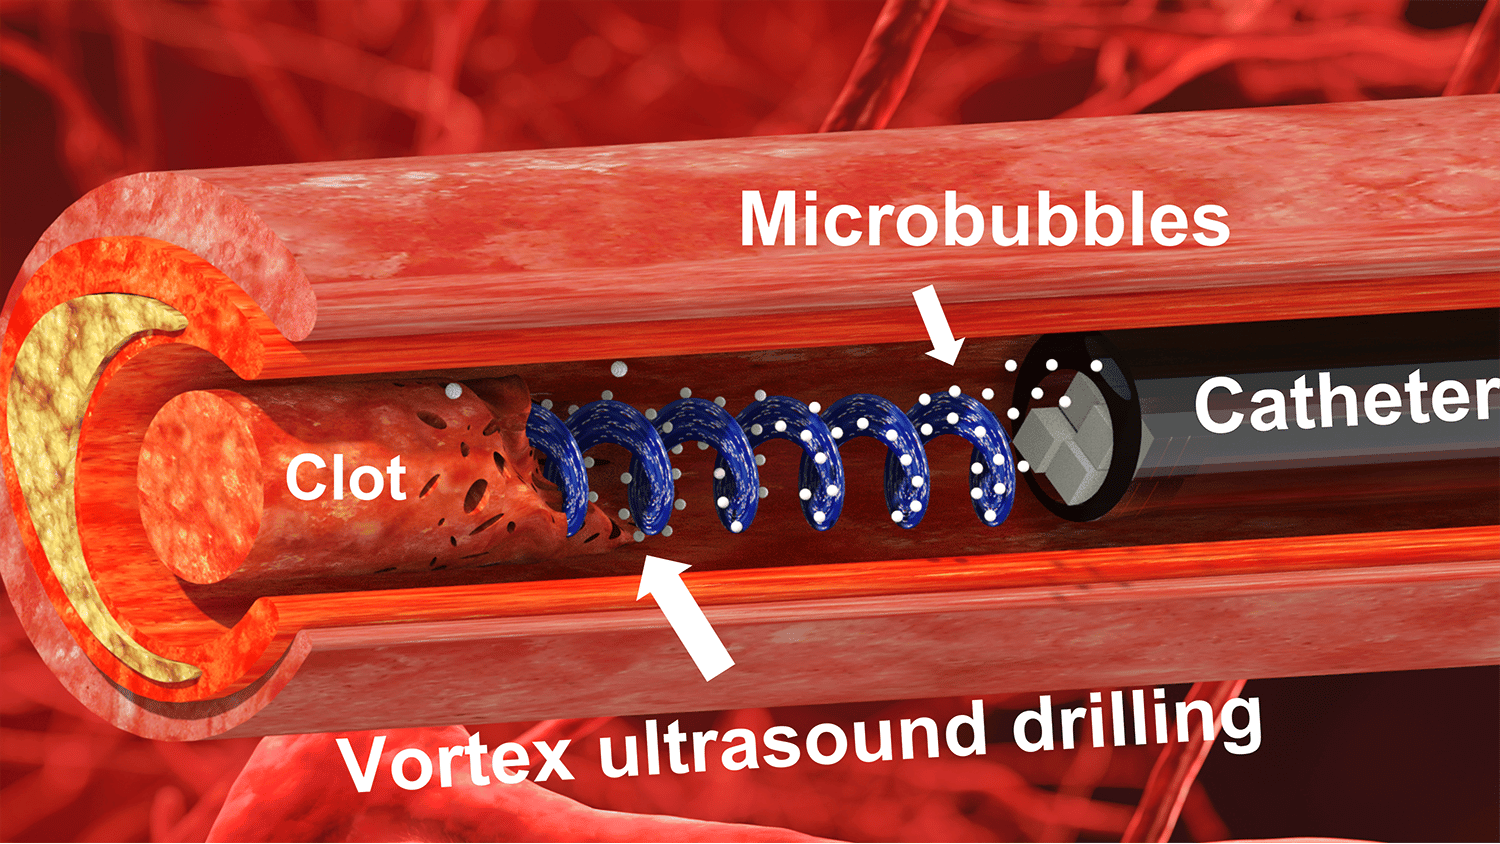 illustration shows cross-section of a clogged blood vessel, with blue lines representing the vortex ultrasound clearing the clot